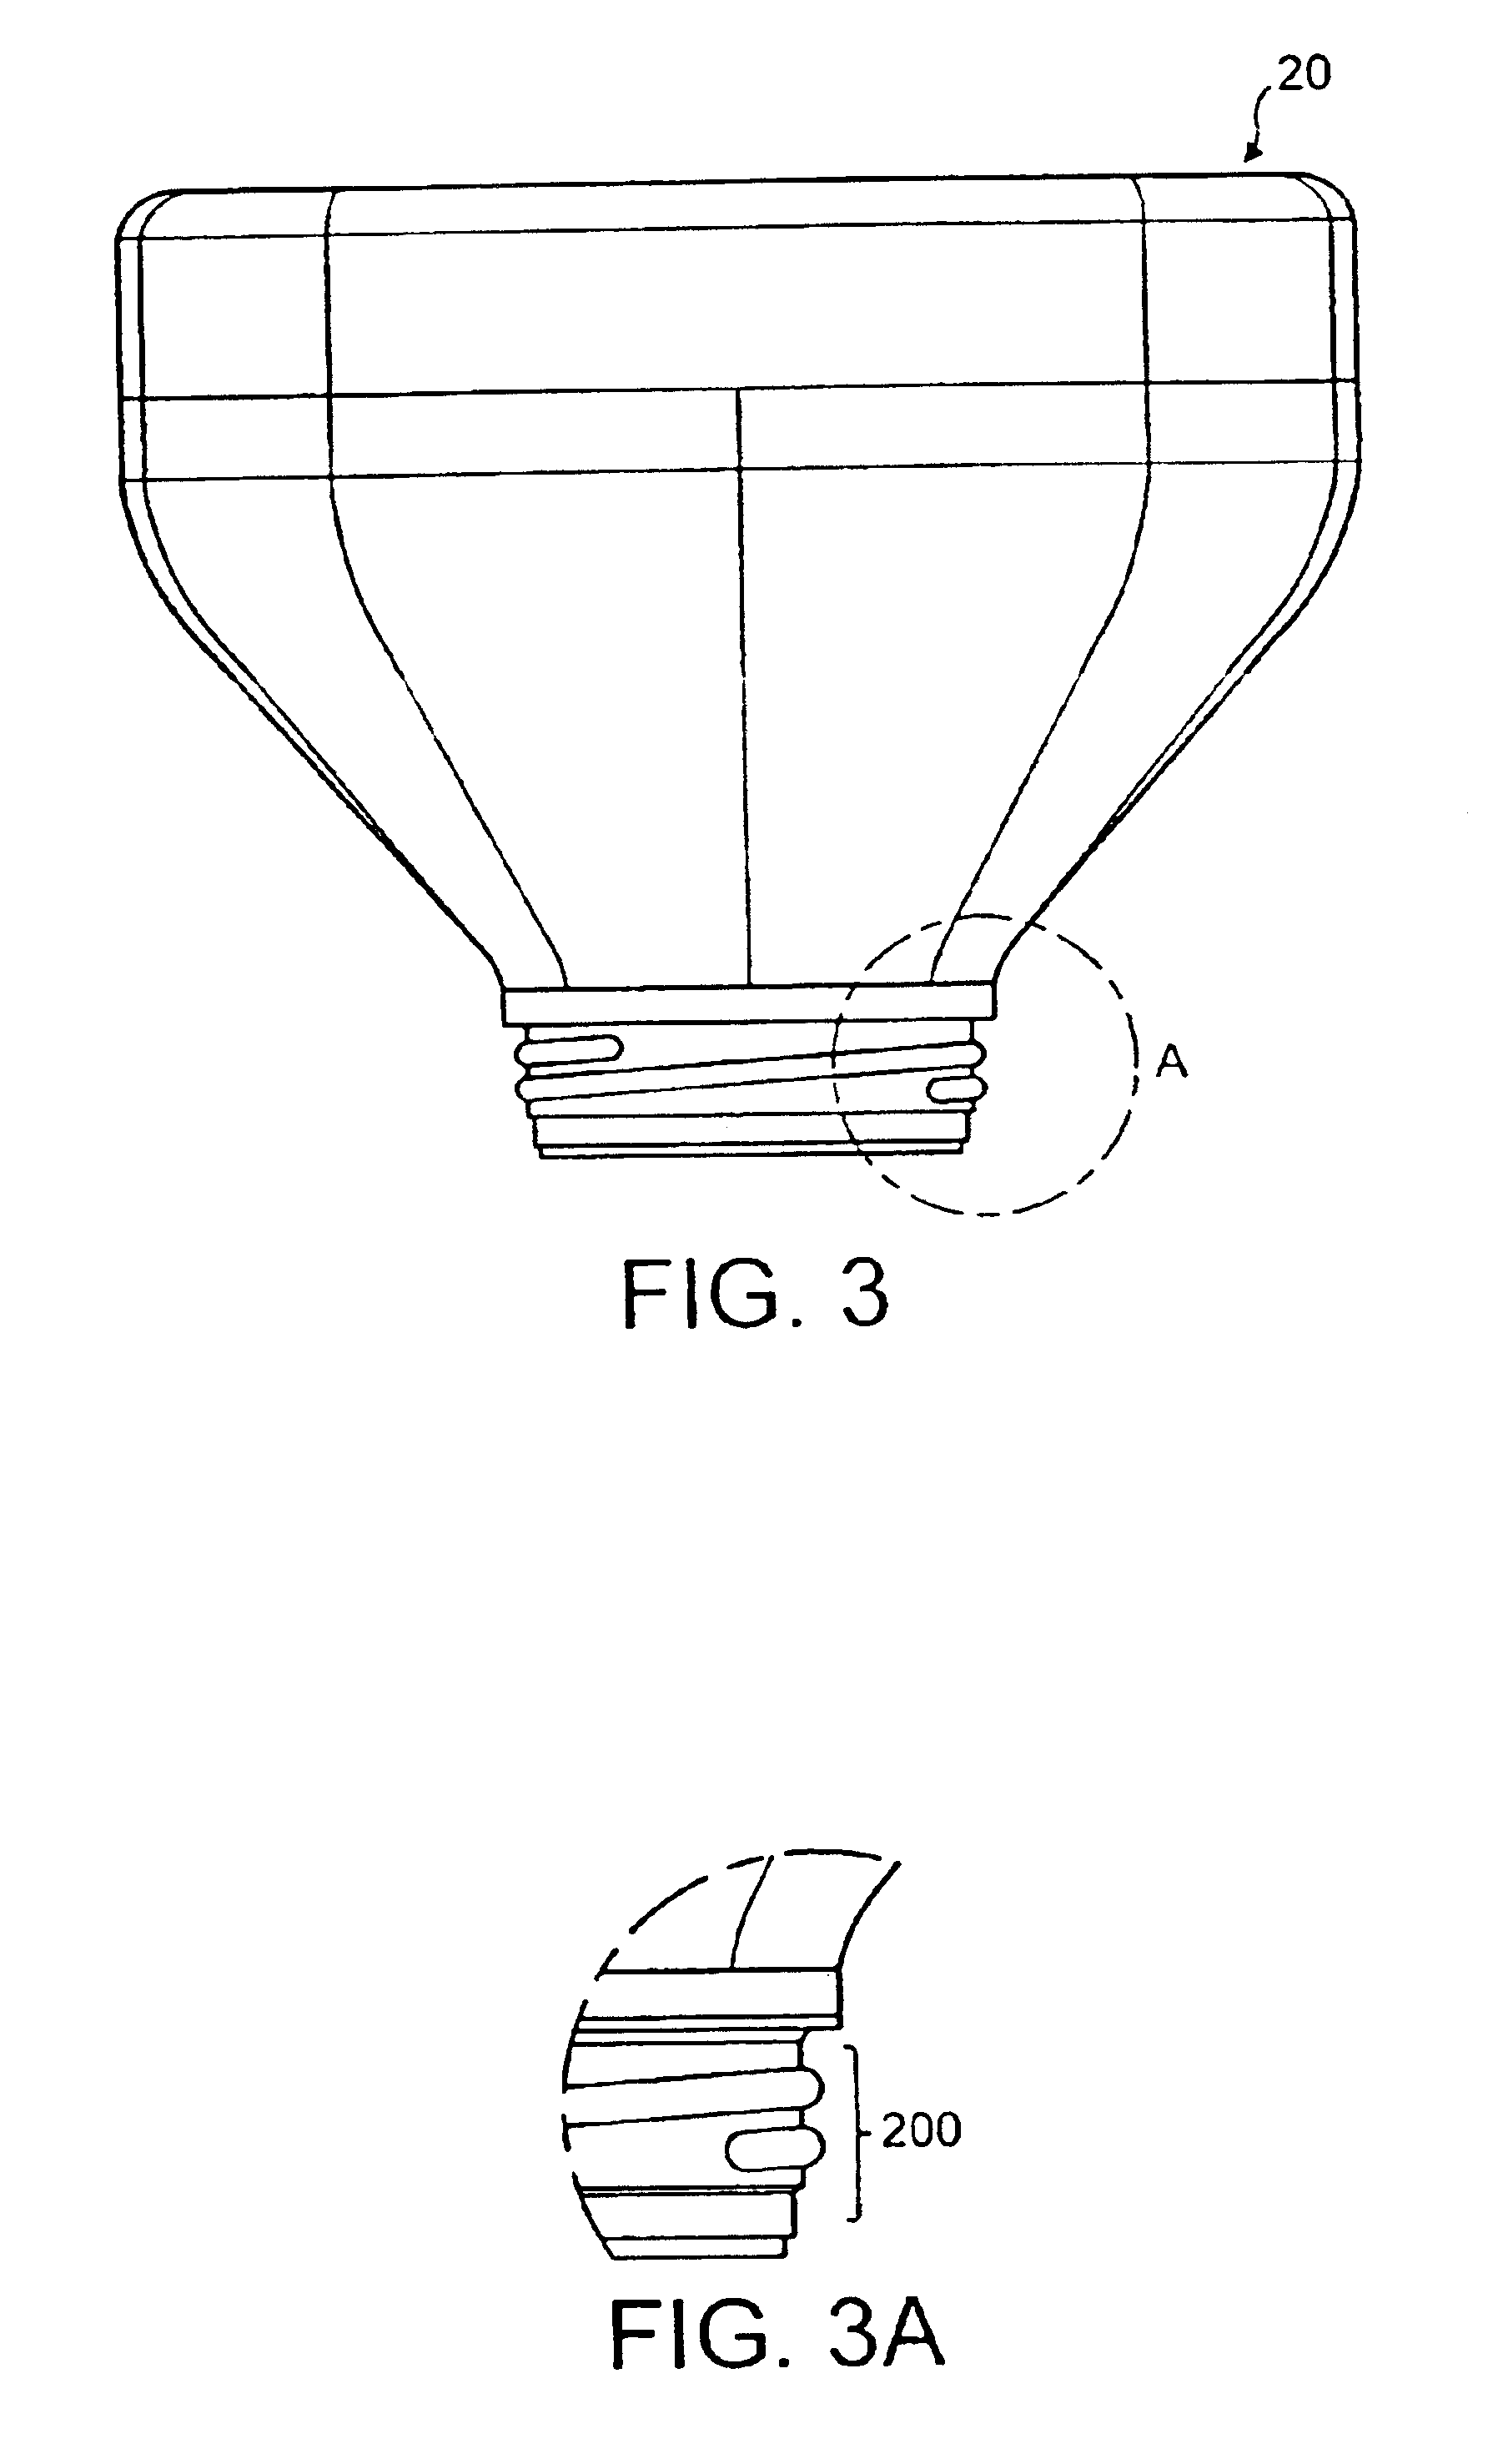 Containers of flowable substance adapted for connecting to dispensing devices of a beverage or food dispensing machine